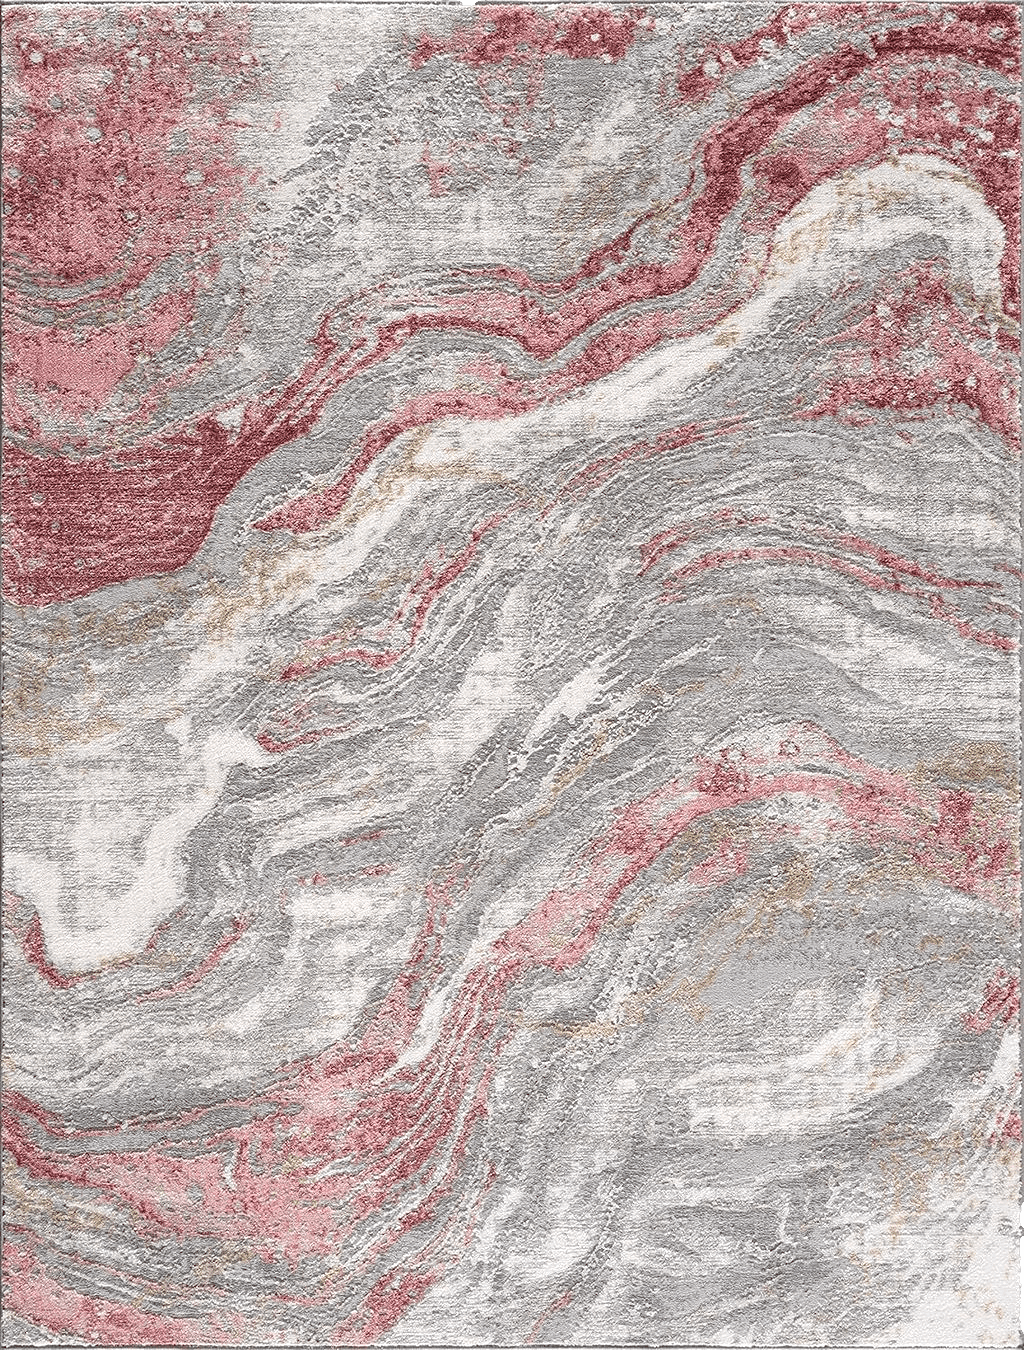 Hauteloom Liverpool Modern Abstract Bedroom Living Room Area Rug - Marble Swirl Pattern - Contemporary Bohemian Farmhouse - Pink, Red, Grey, Off White - 9'2" x 12'